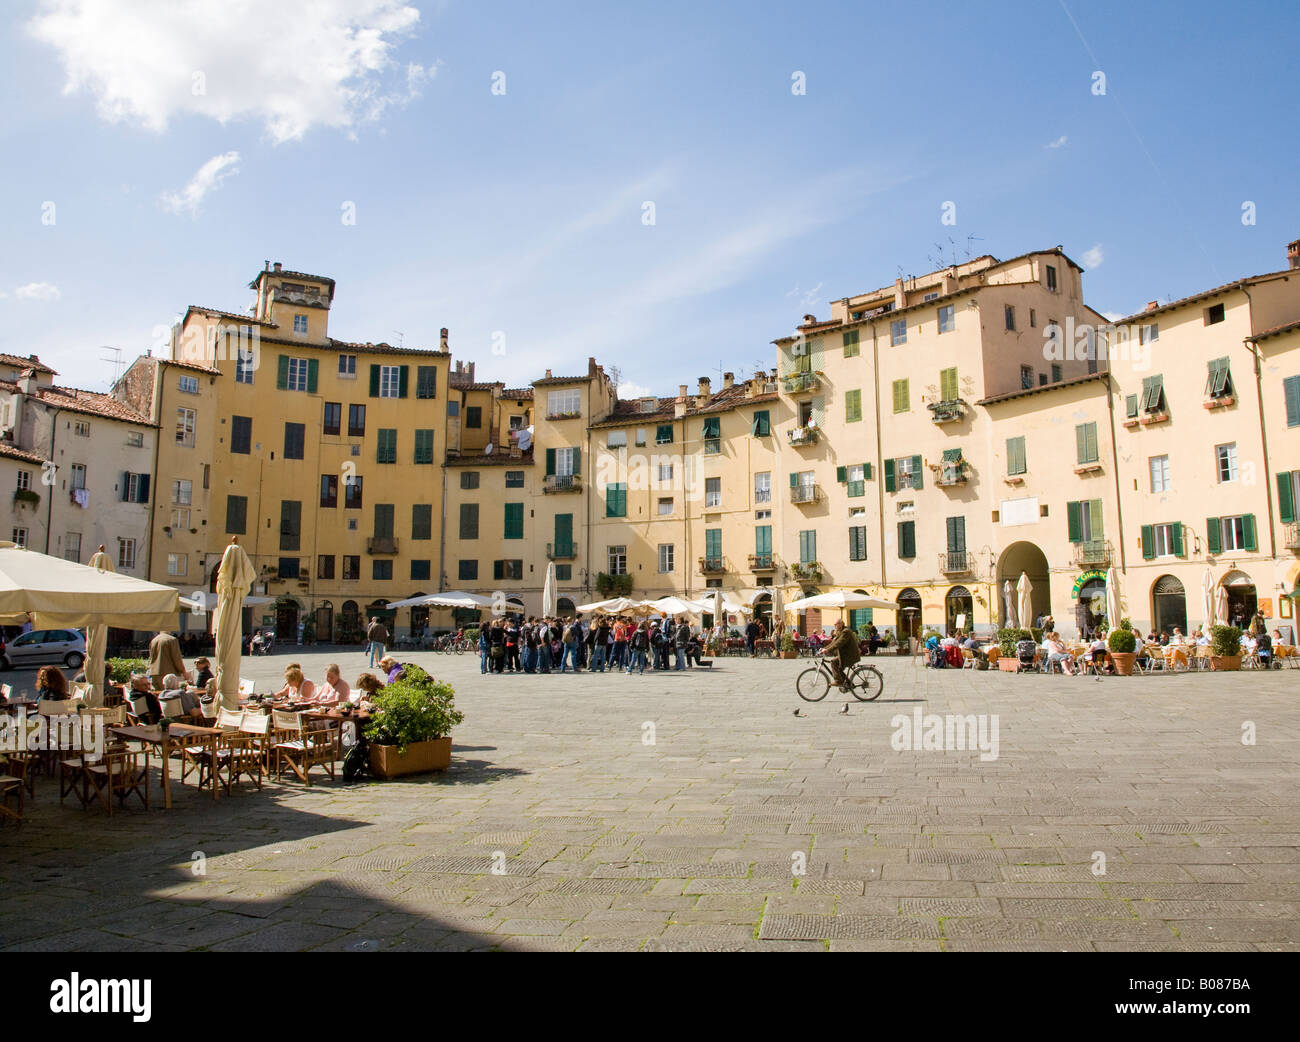 Piazza Anfiteatro Romano the square buit on the remains of a Roman amphitheatre in Lucca Tuscany Stock Photo